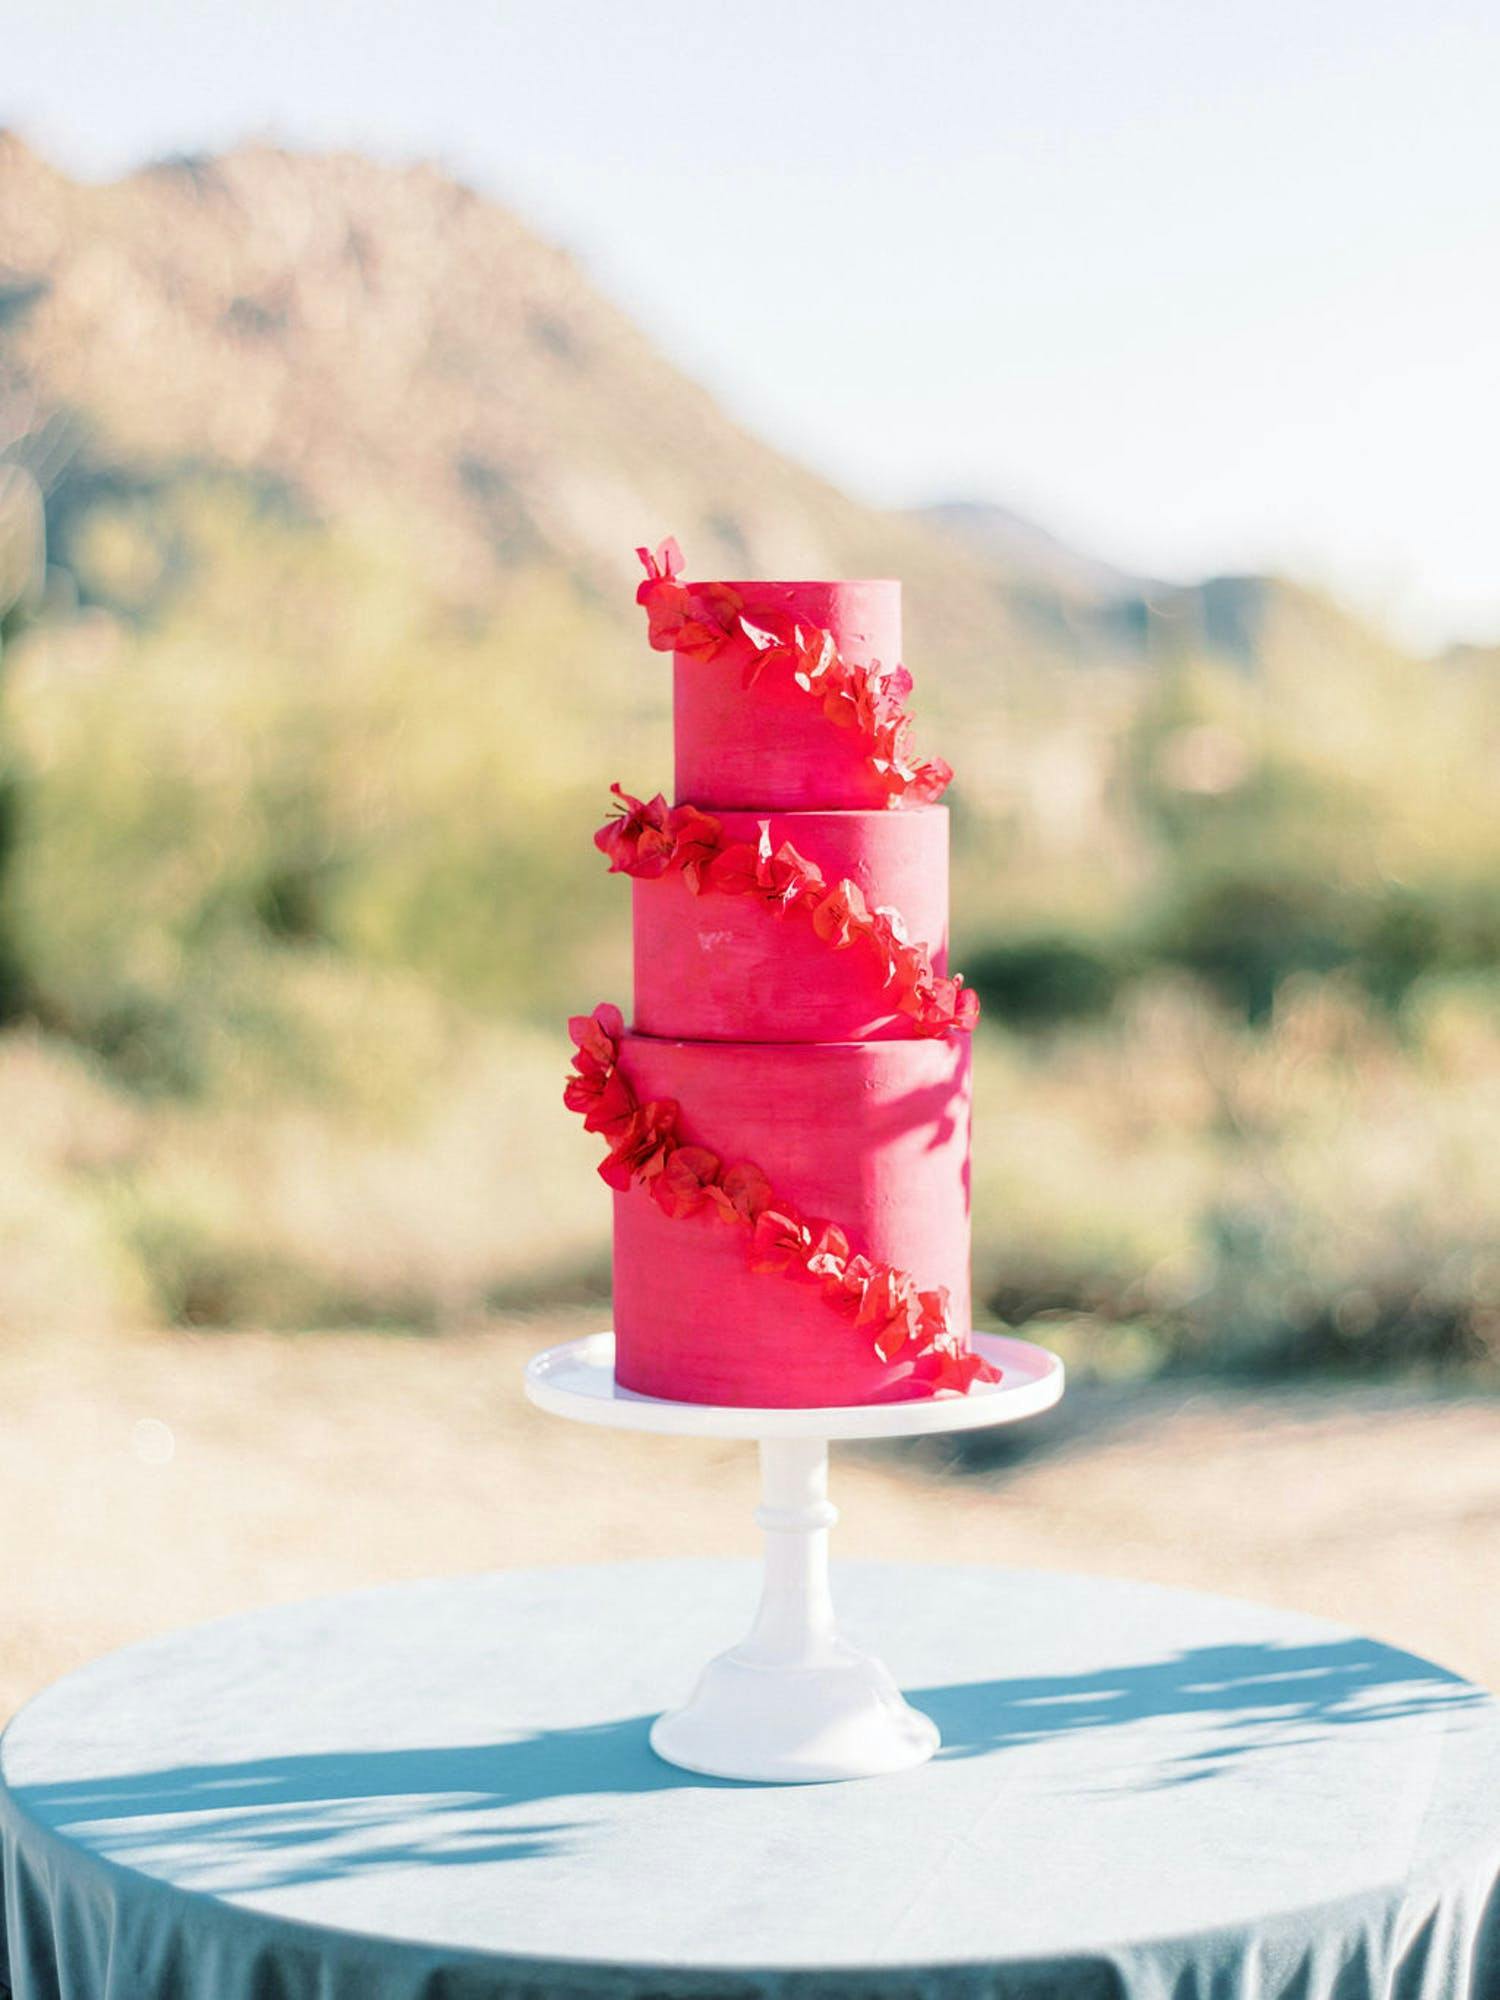 Irene's Cakes by Design - Wedding Cake - Leicester, NC - WeddingWire